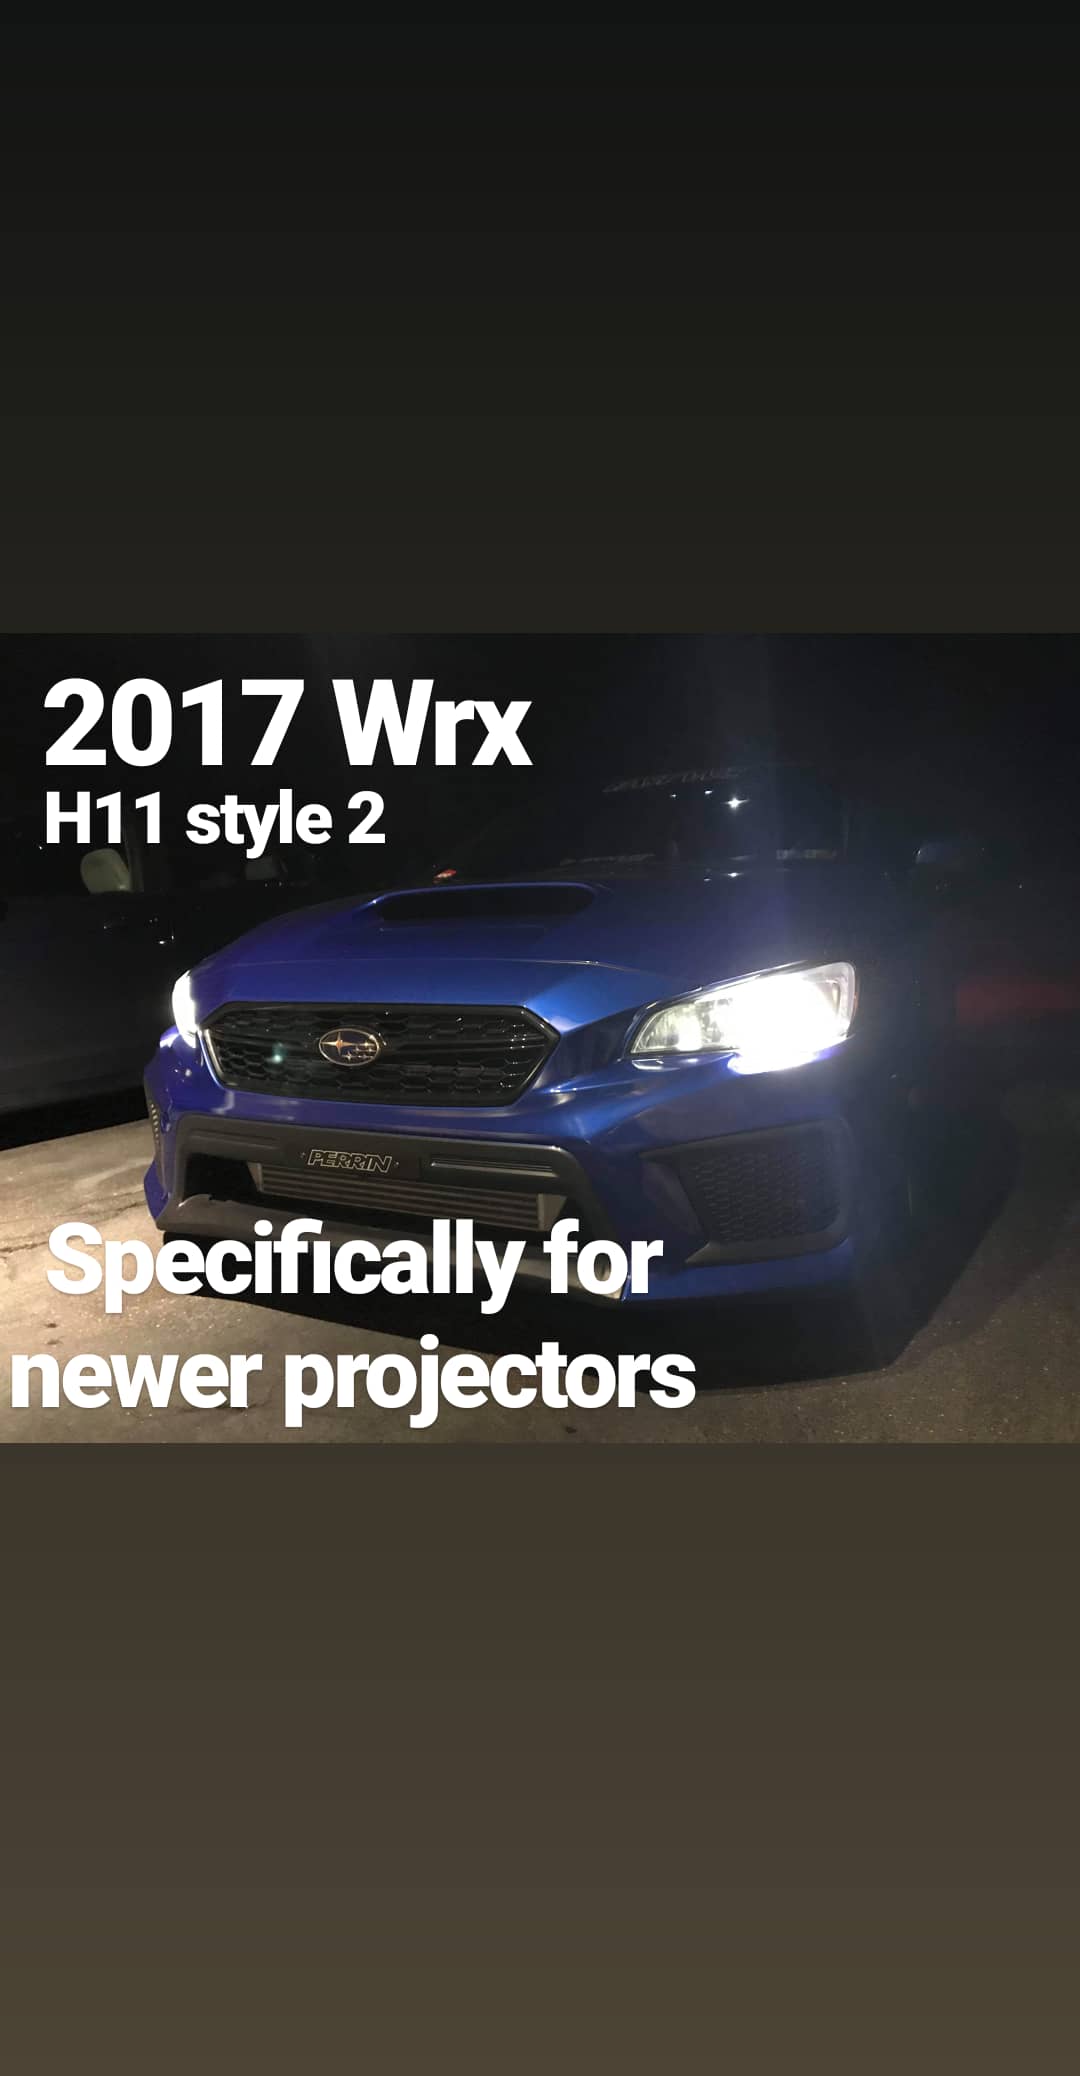 Image of Performance Bodega h8, h9, h11  (style 2) vehicles 2010 or newer equipped with factory projectors